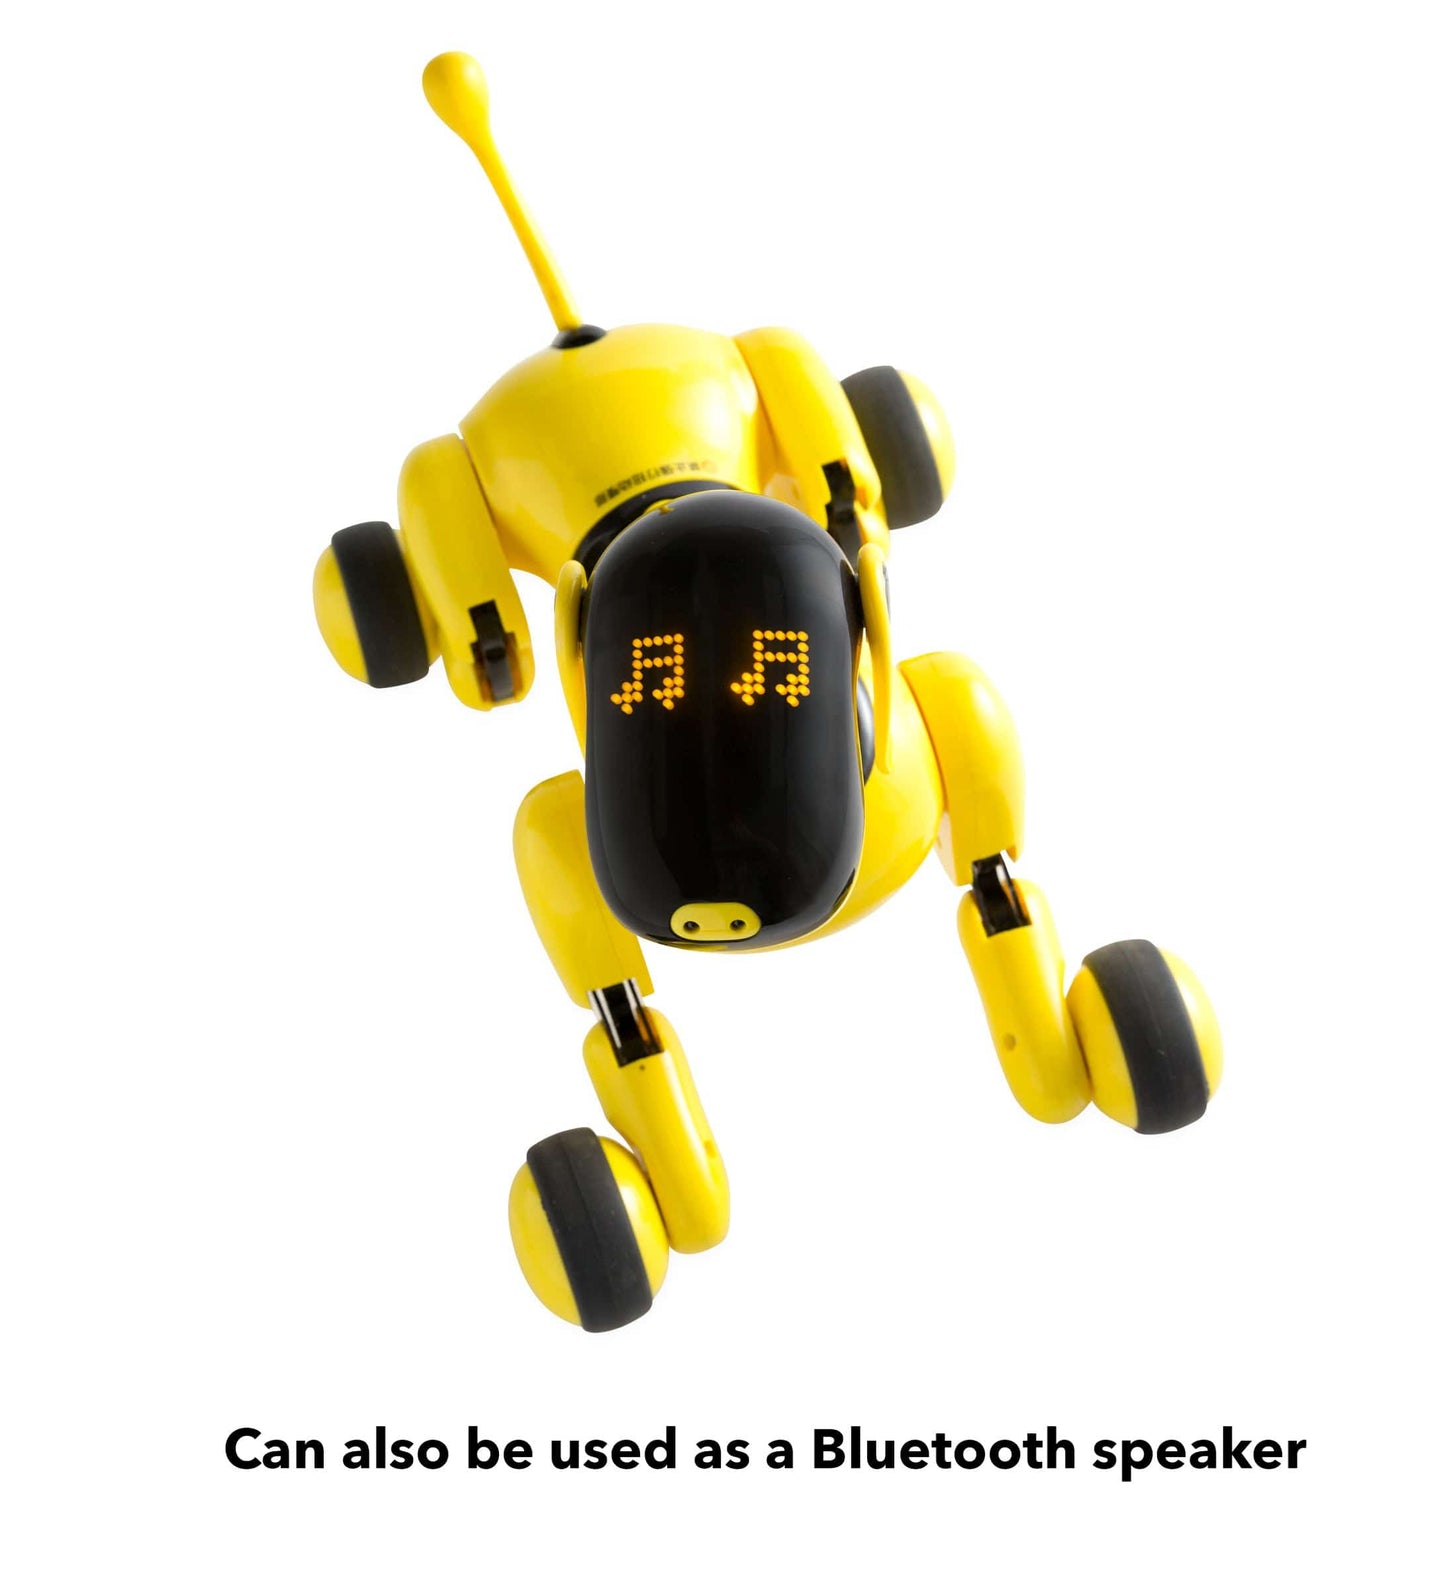 Gizmo the Robotic Dog and Bluetooth Speaker